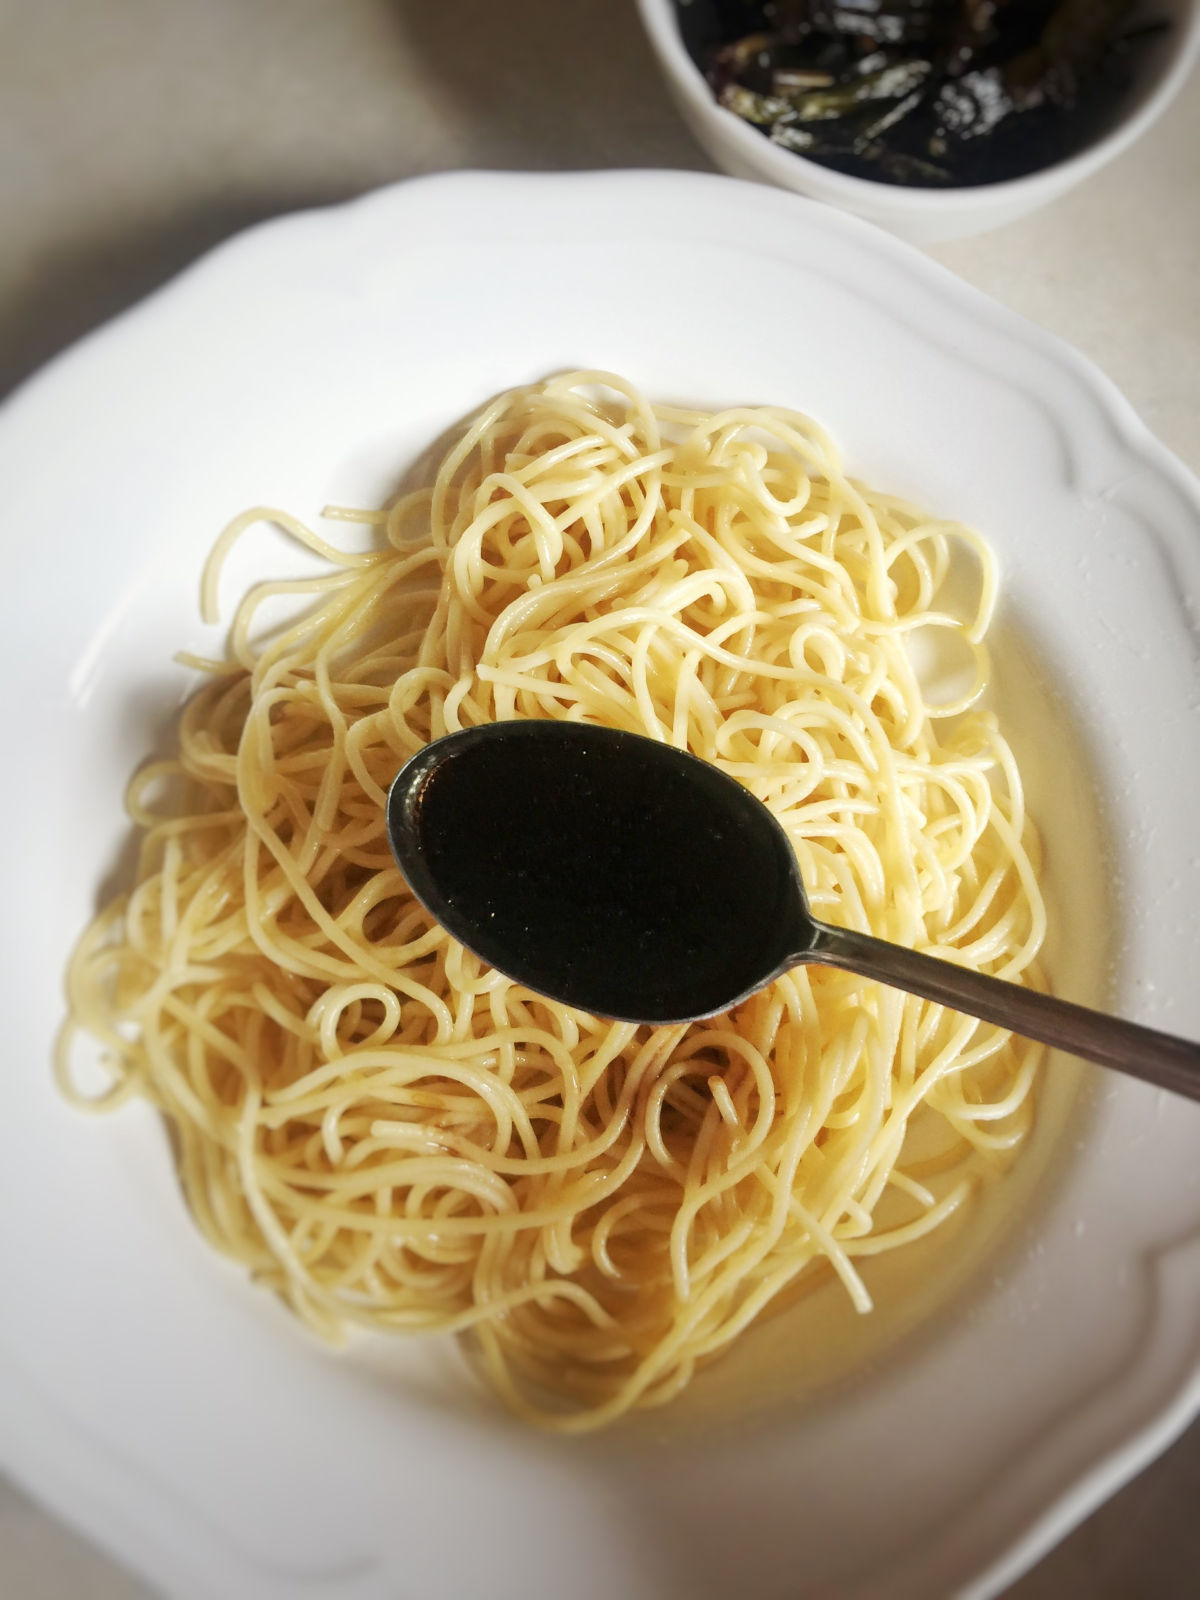 Overhead view of a white plate with drained pasta next to the cooked scallions placed in a small white bowl. A spoon of scallion oil to be added to the pasta.